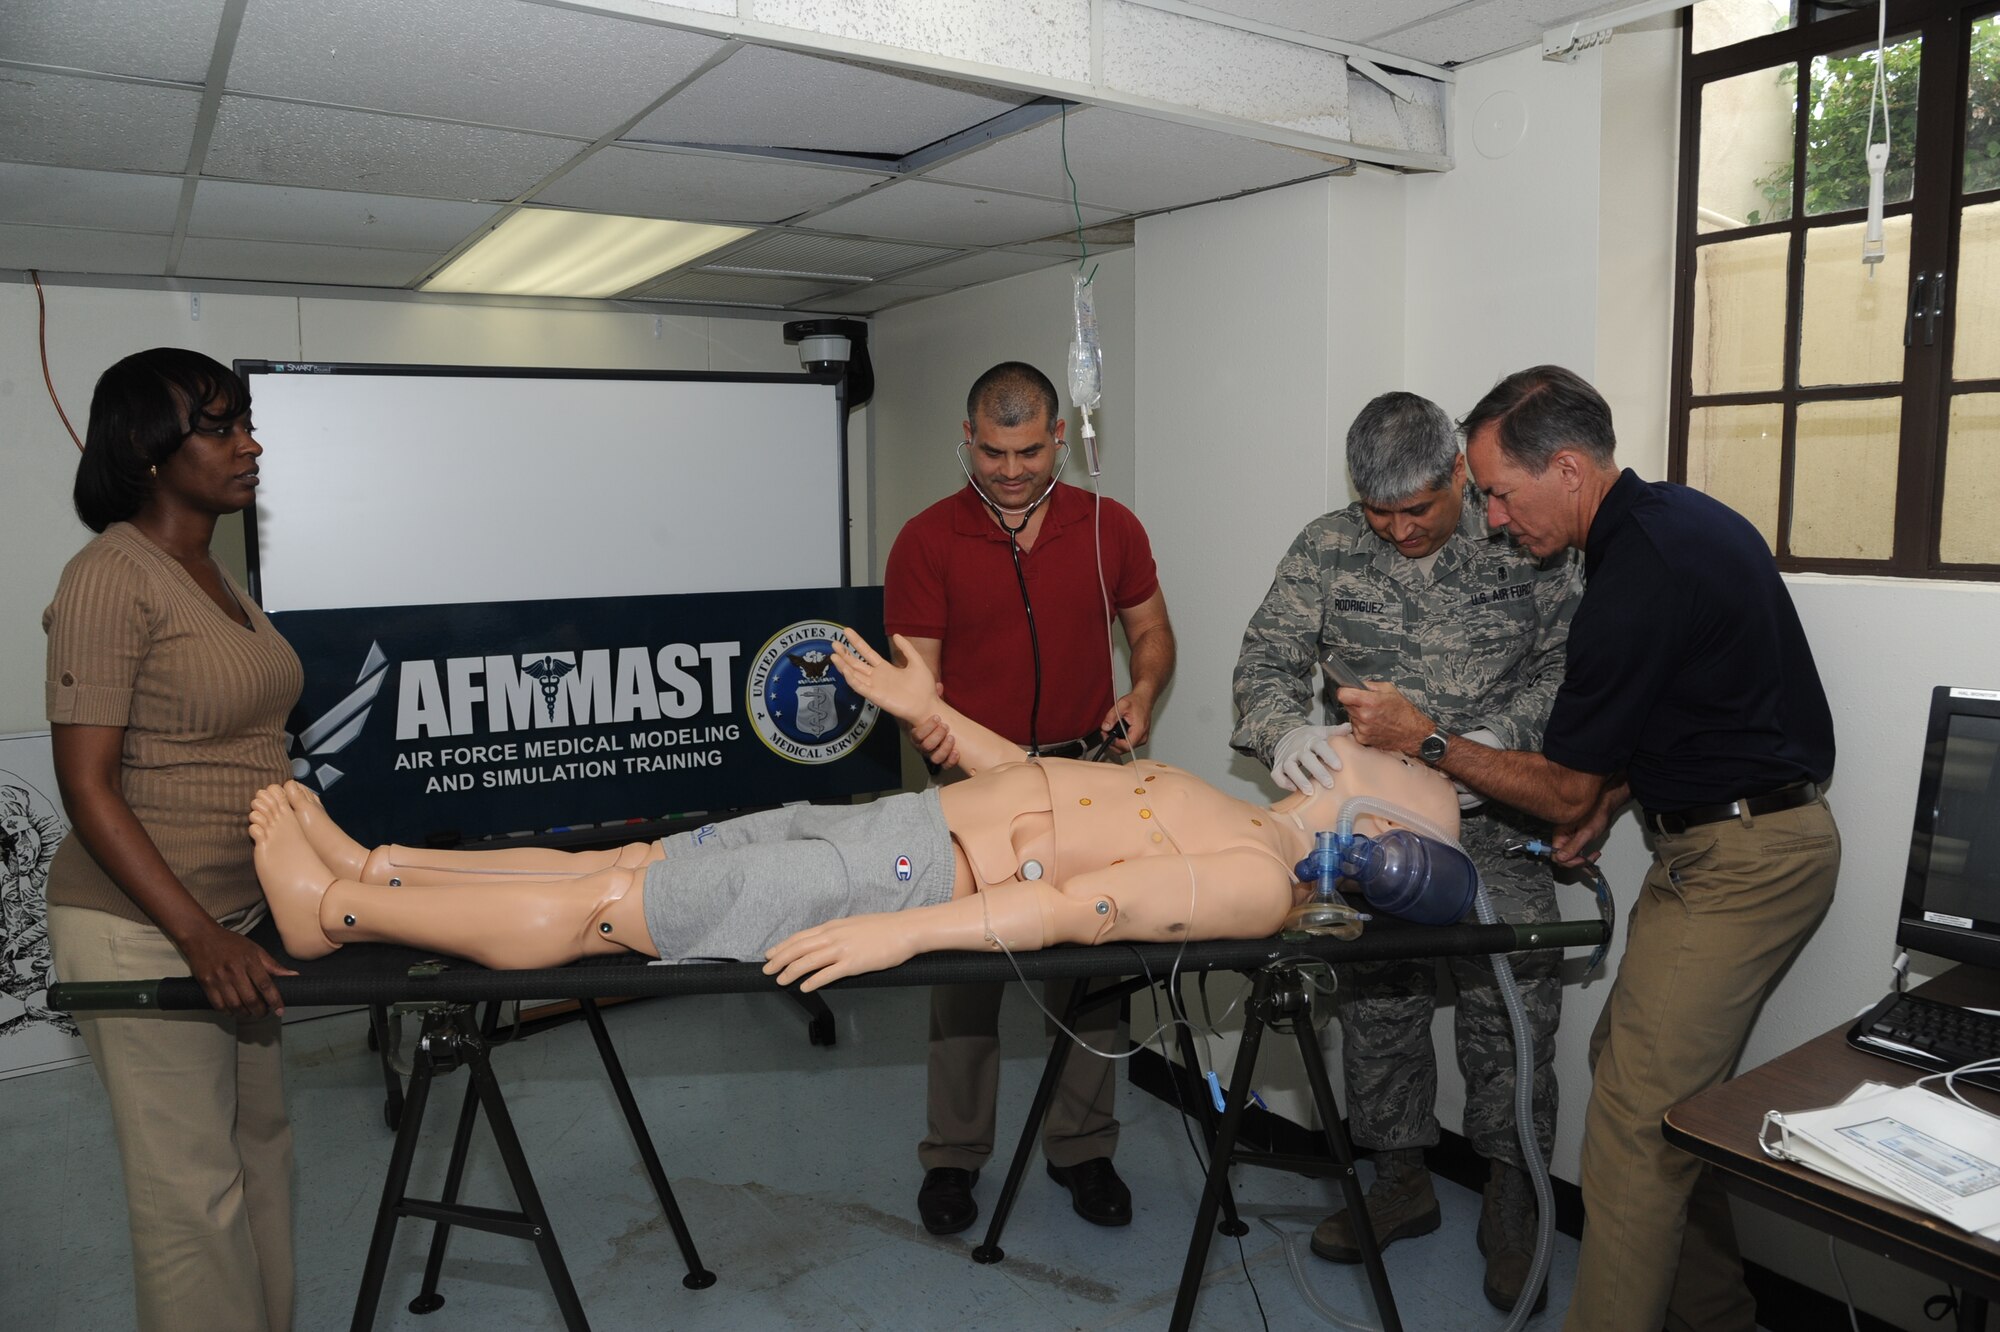 From left: Maya Machacon, Air Force Medical Modeling and Simulation Training curriculum specialist; Ruben Garza, AFMMAST program deputy chief and administrator; Senior Master Sgt. Juan Rodriguez, AFMMAST program manager; and Doug Howard, AFMMAST chief of curriculum, exercise their medical training through simulation with a dummy May 9 at AFMMAST program training room, building 671 at Joint Base San Antonio-Randolph. (U.S. Air Force photo by Airman 1st Class Kenna Jackson)


